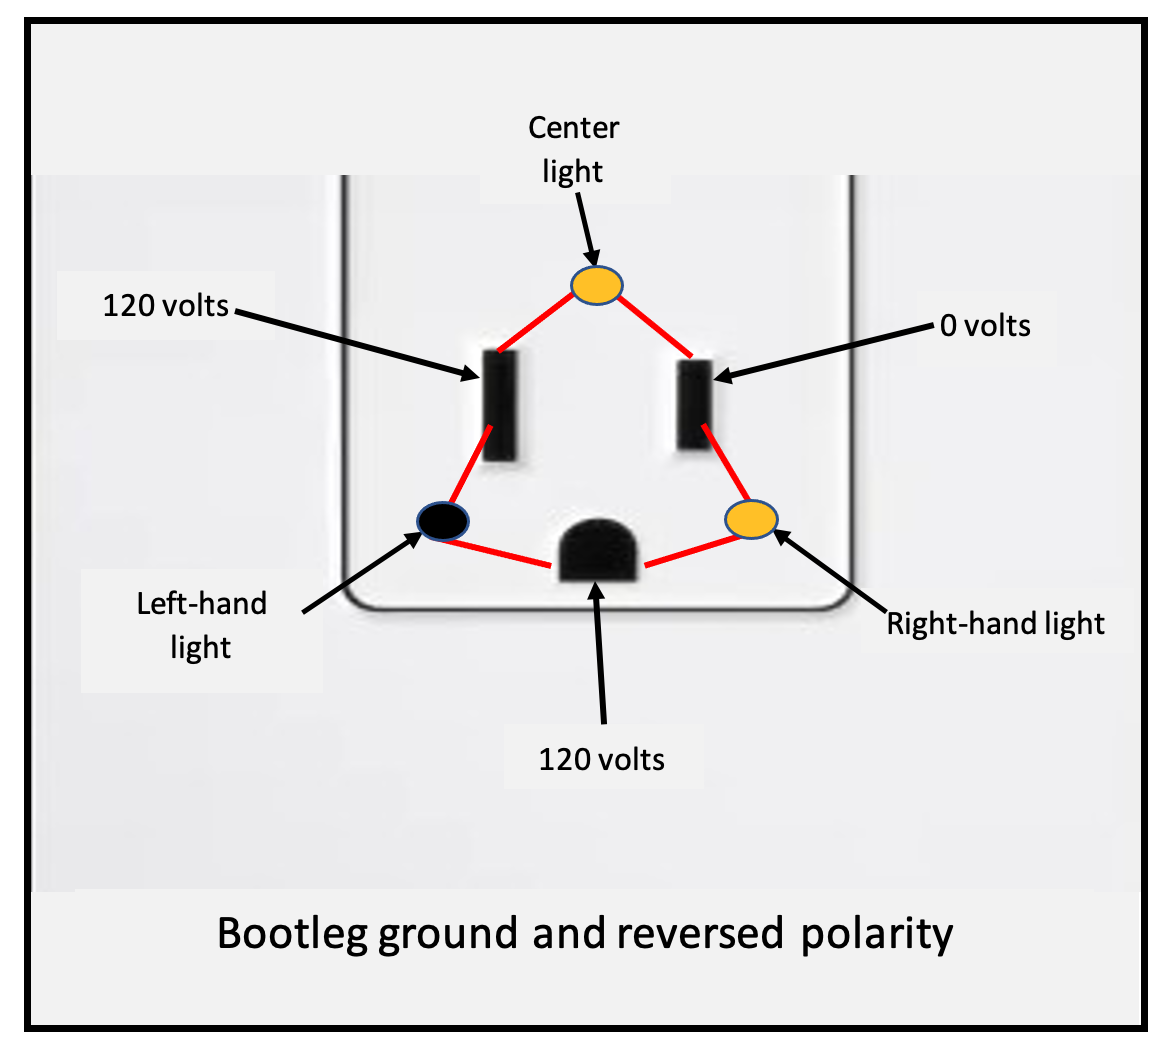 graphic showing bootleg ground with reverse polarity